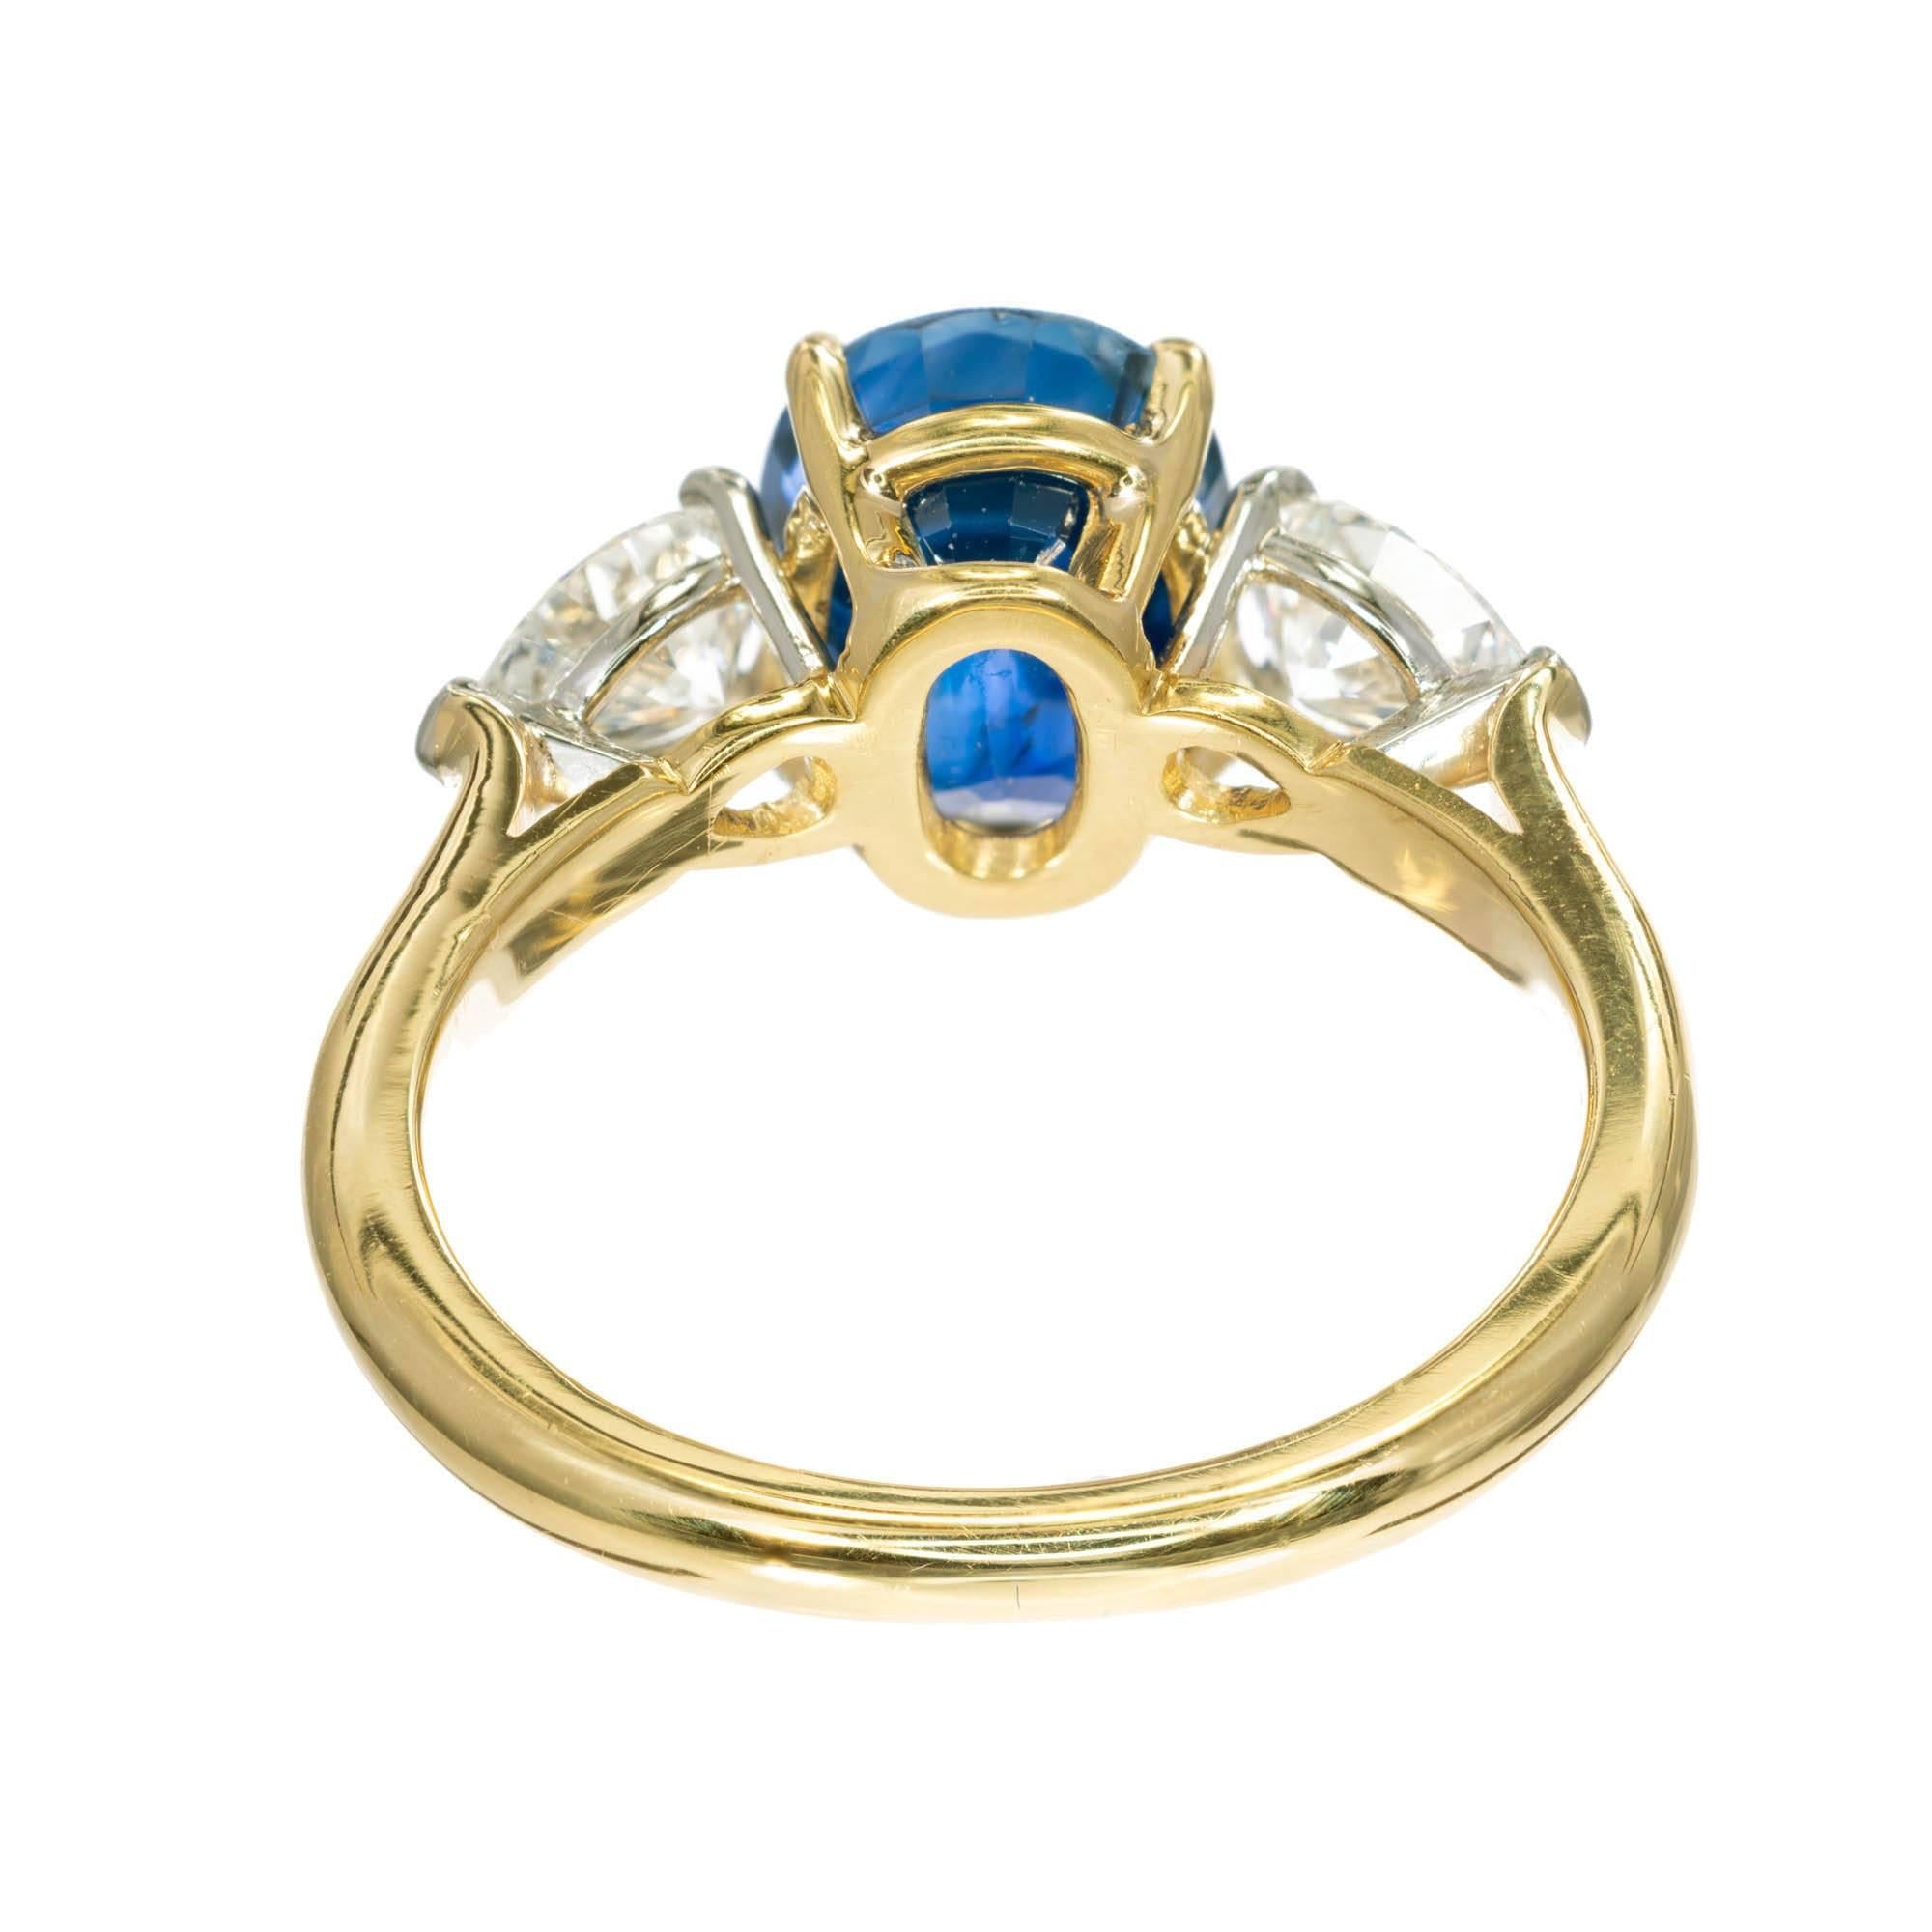 Peter Suchy 2.83 Carat Sapphire Diamond Gold Platinum Engagement Ring In Good Condition For Sale In Stamford, CT